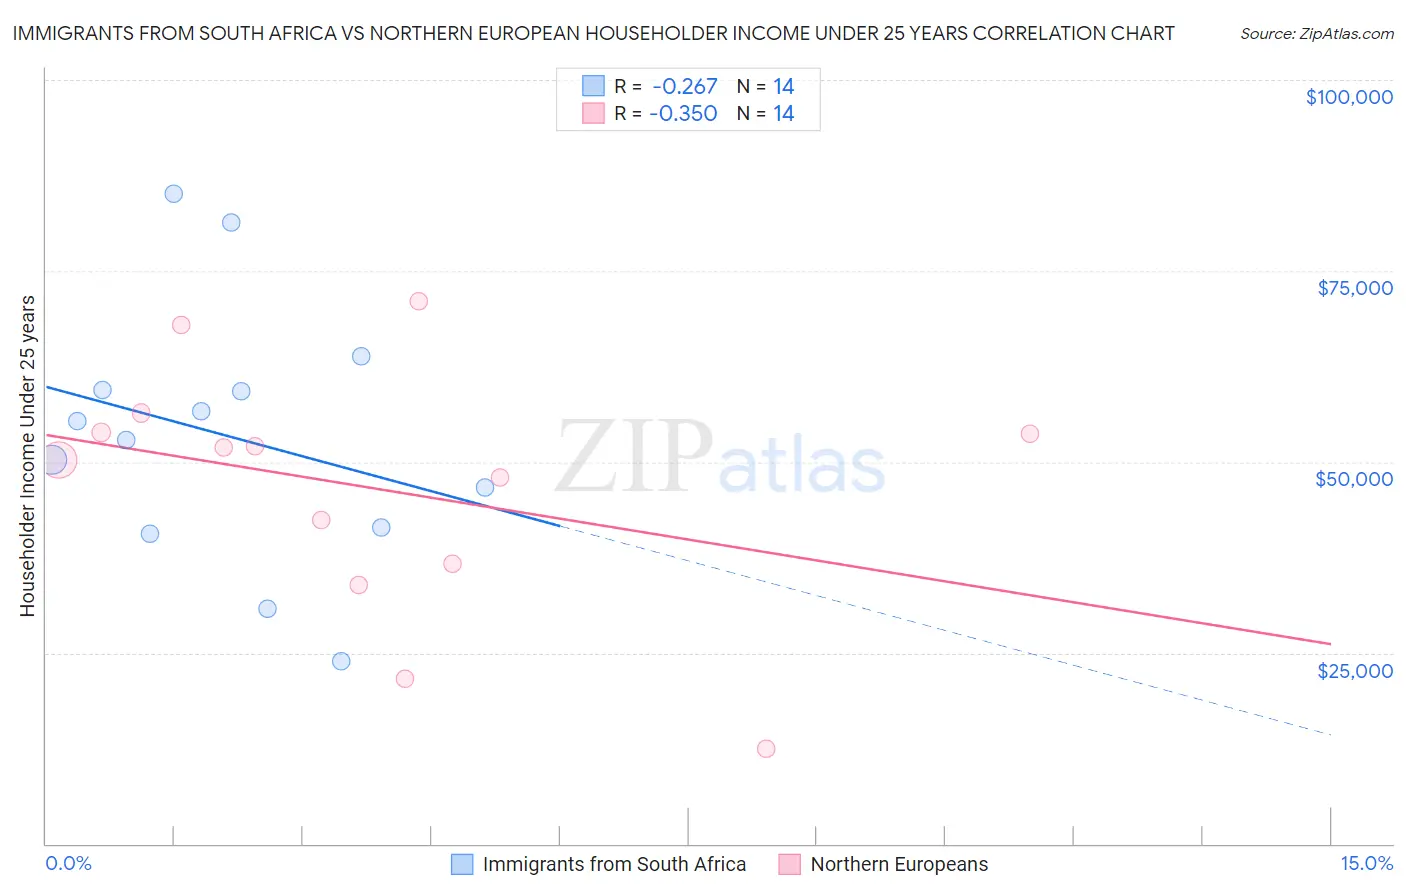 Immigrants from South Africa vs Northern European Householder Income Under 25 years